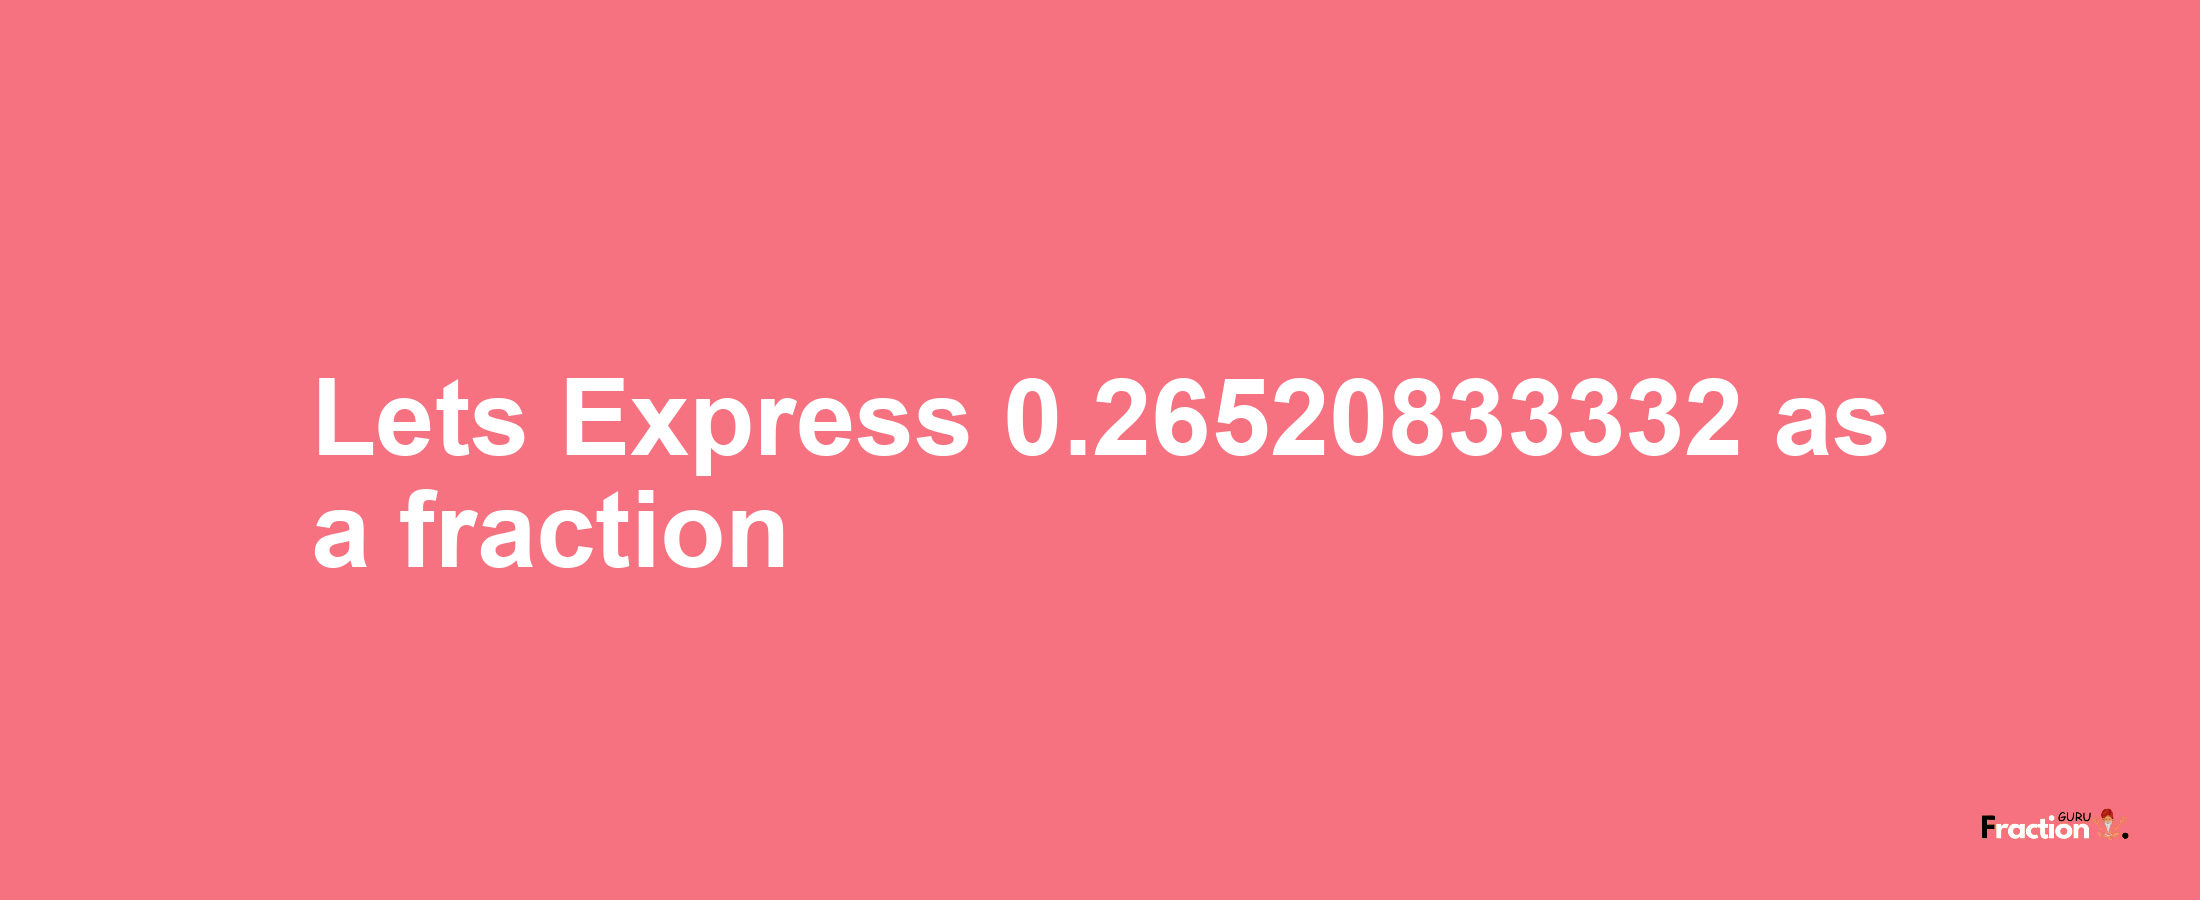 Lets Express 0.26520833332 as afraction